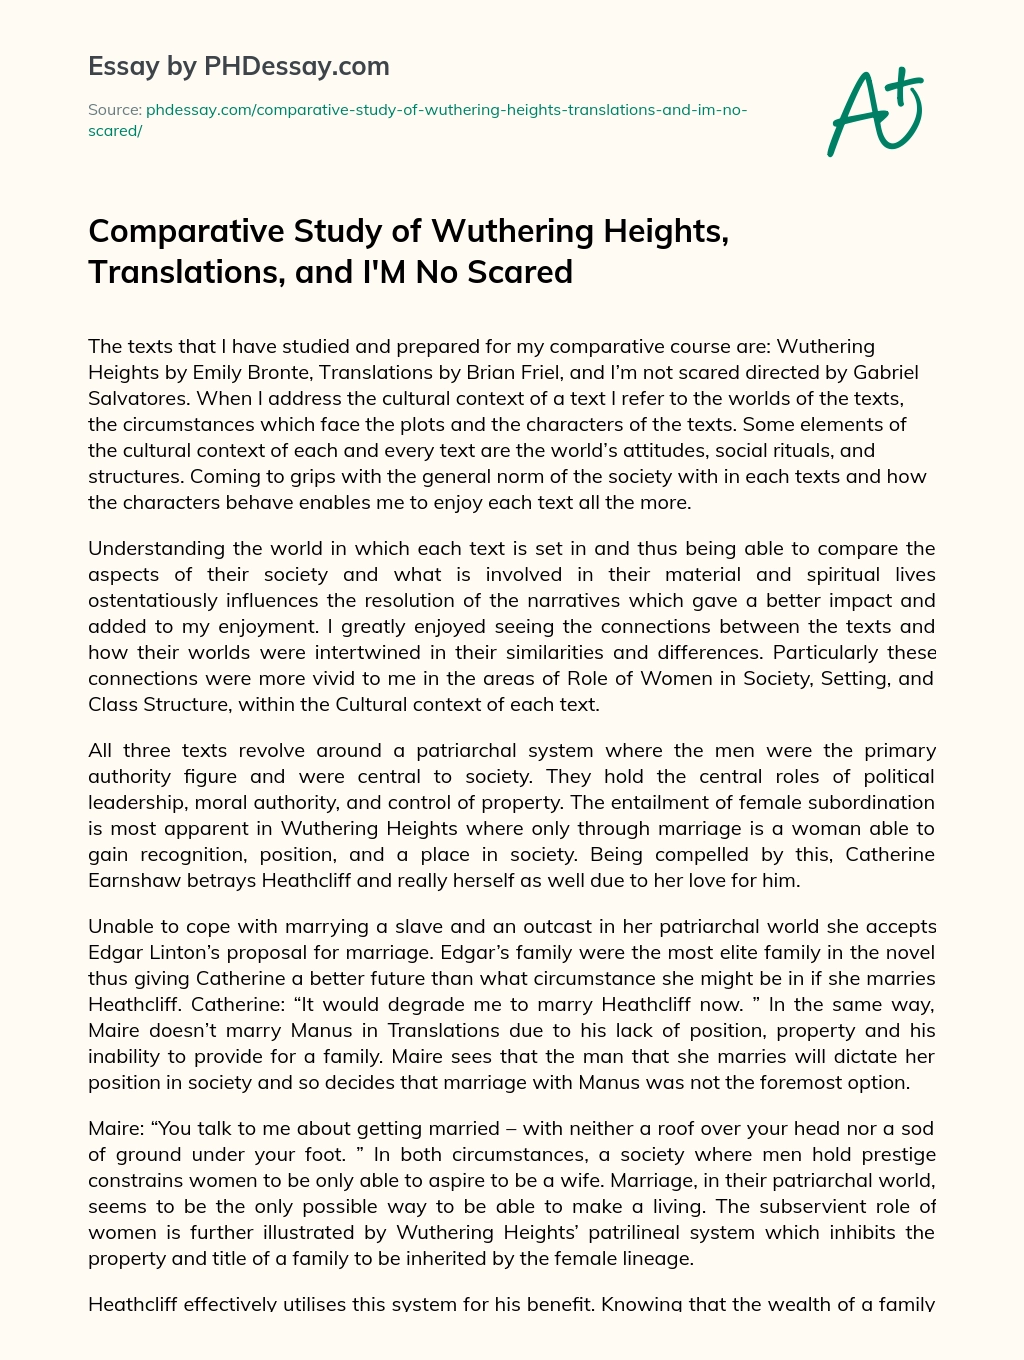 Comparative Study of Wuthering Heights, Translations, and I’M No Scared essay